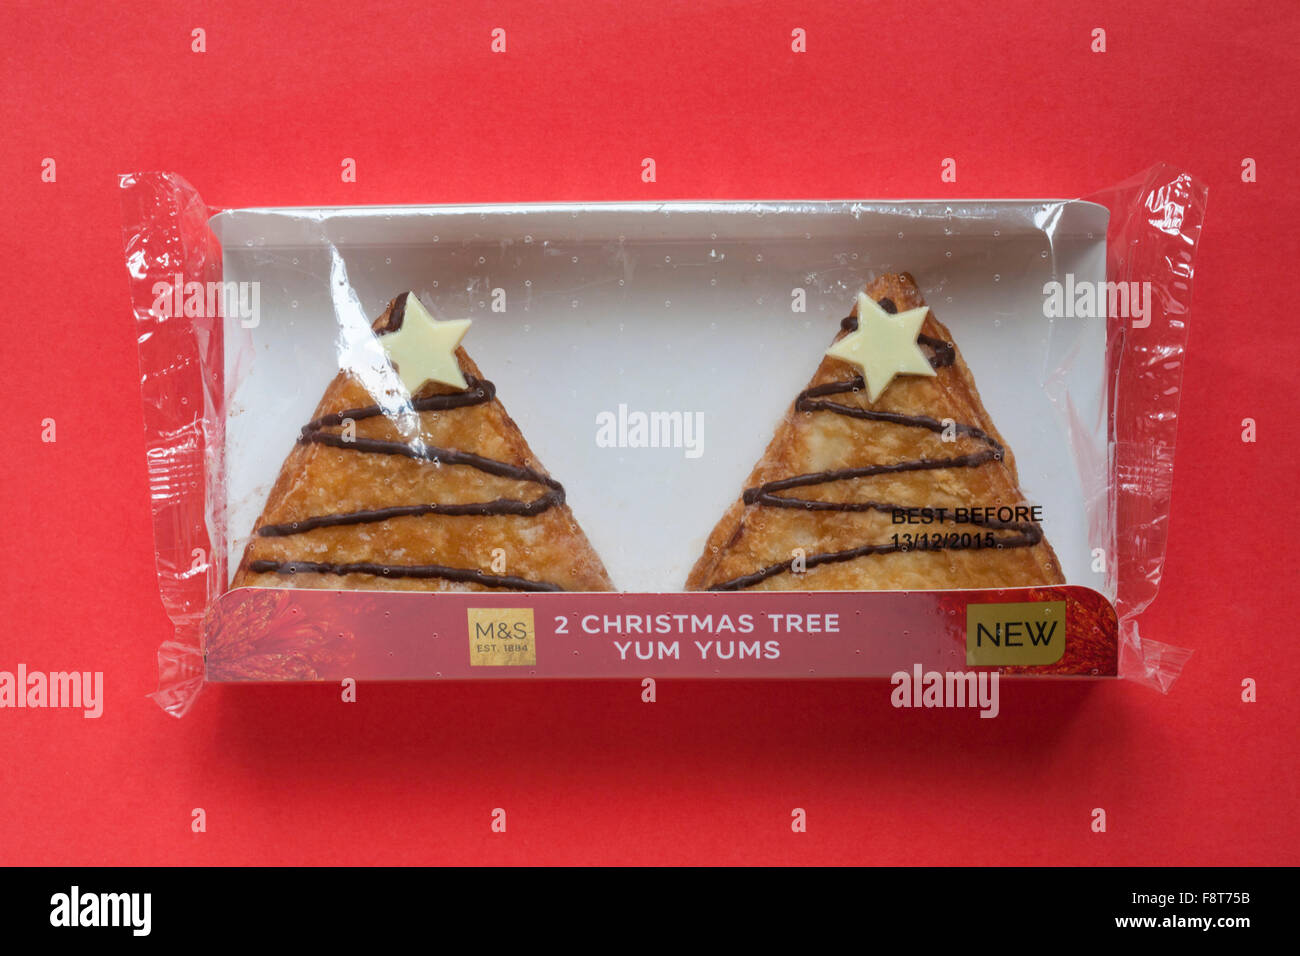 Packet of M&S 2 Christmas Tree Yum Yums iced doughnuts filled with toffee sauce isolated on red background Stock Photo